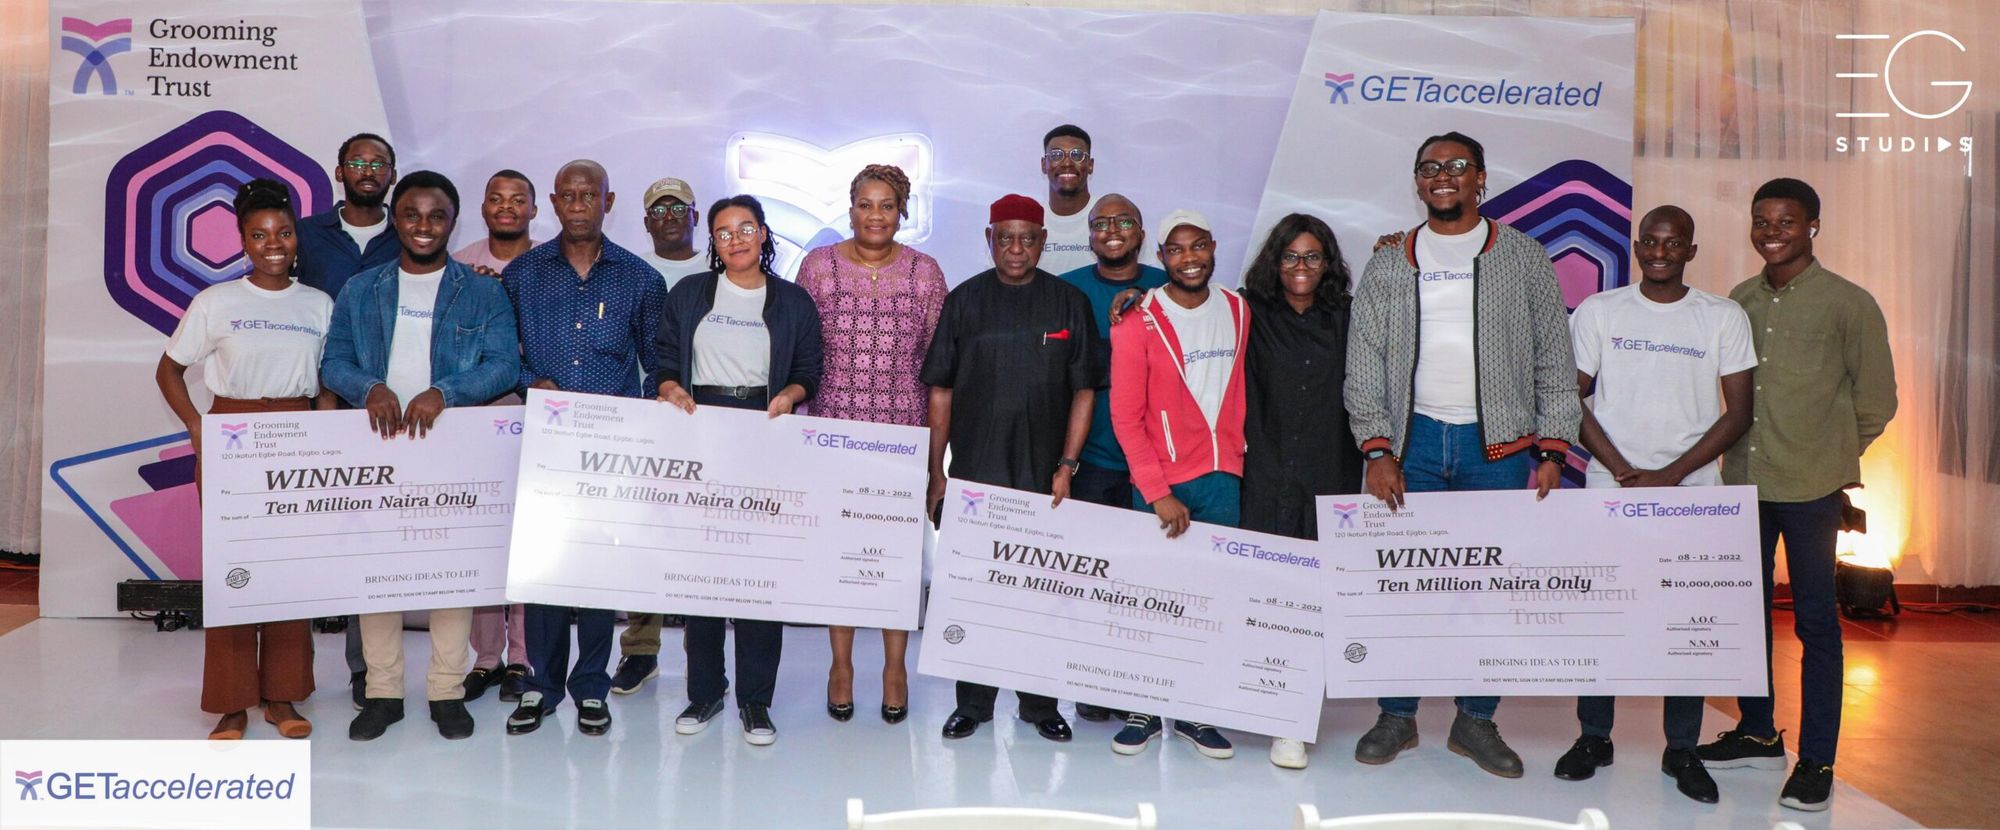 The Grooming Endowment Trust’s 13 Million Grant Initiative To Empowering SMEs for Growth and Innovation.